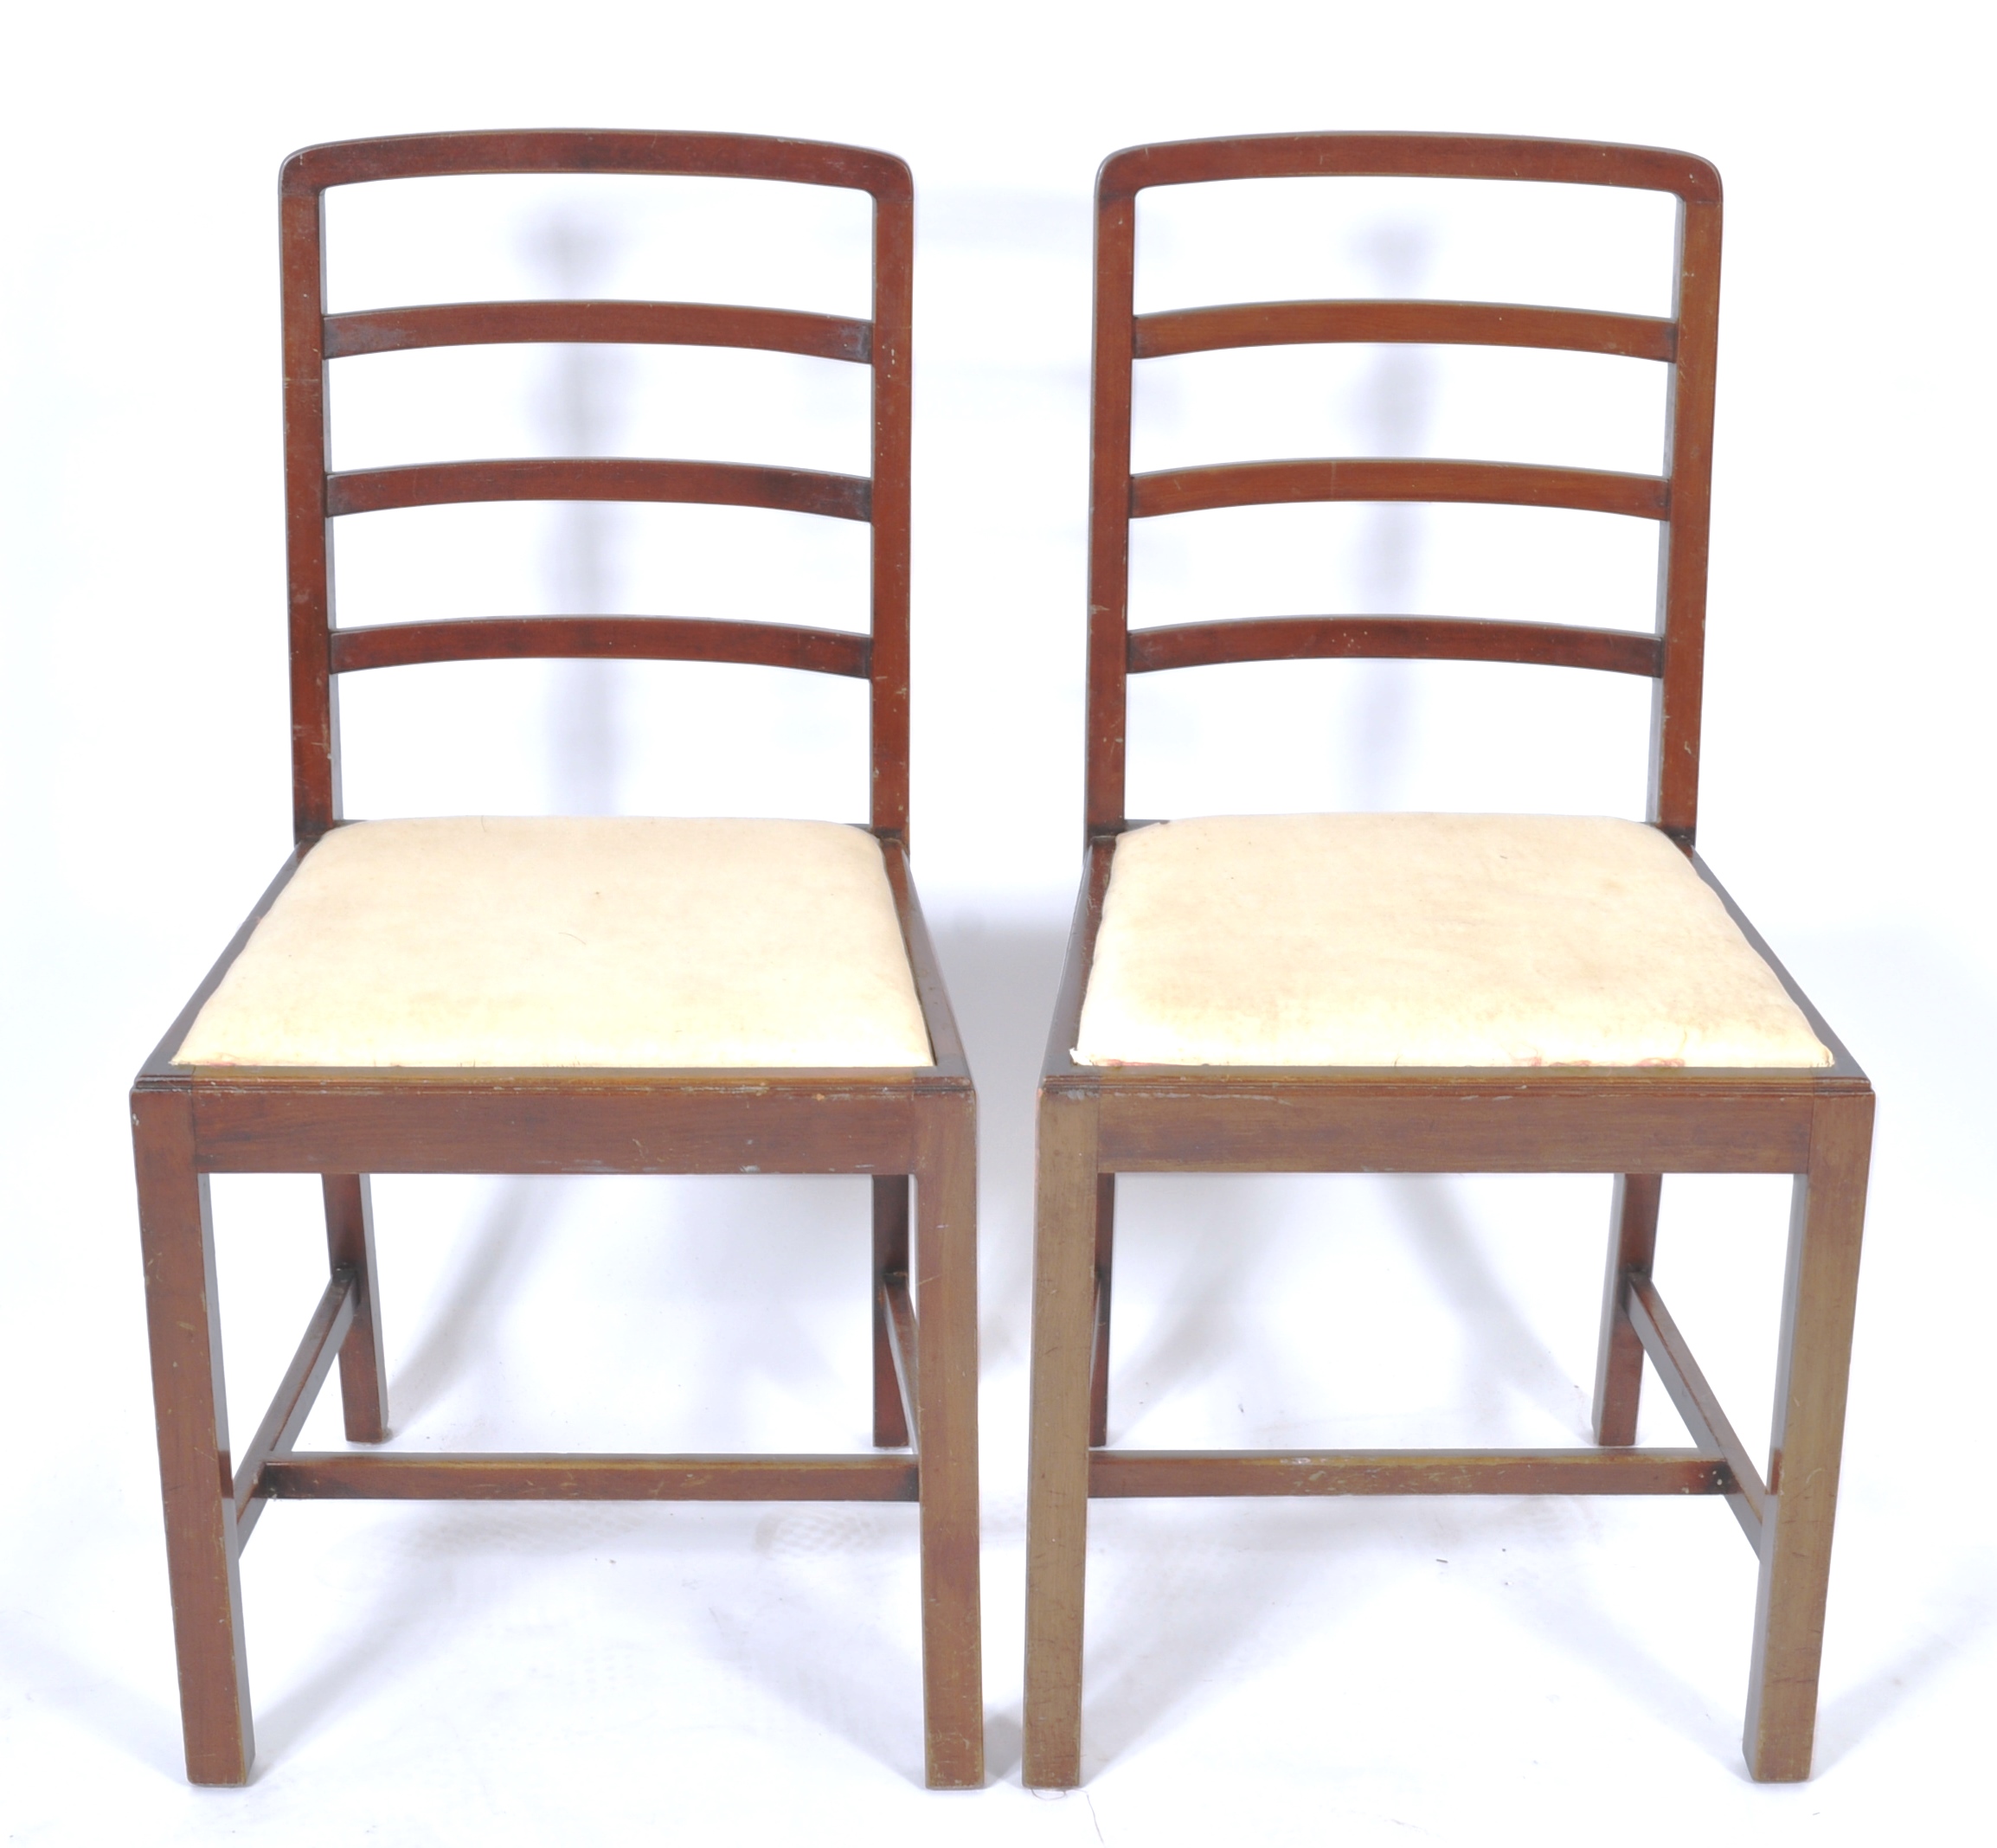 HEALS OF LONDON ORIGINAL SET OF DINING CHAIRS - Image 4 of 7